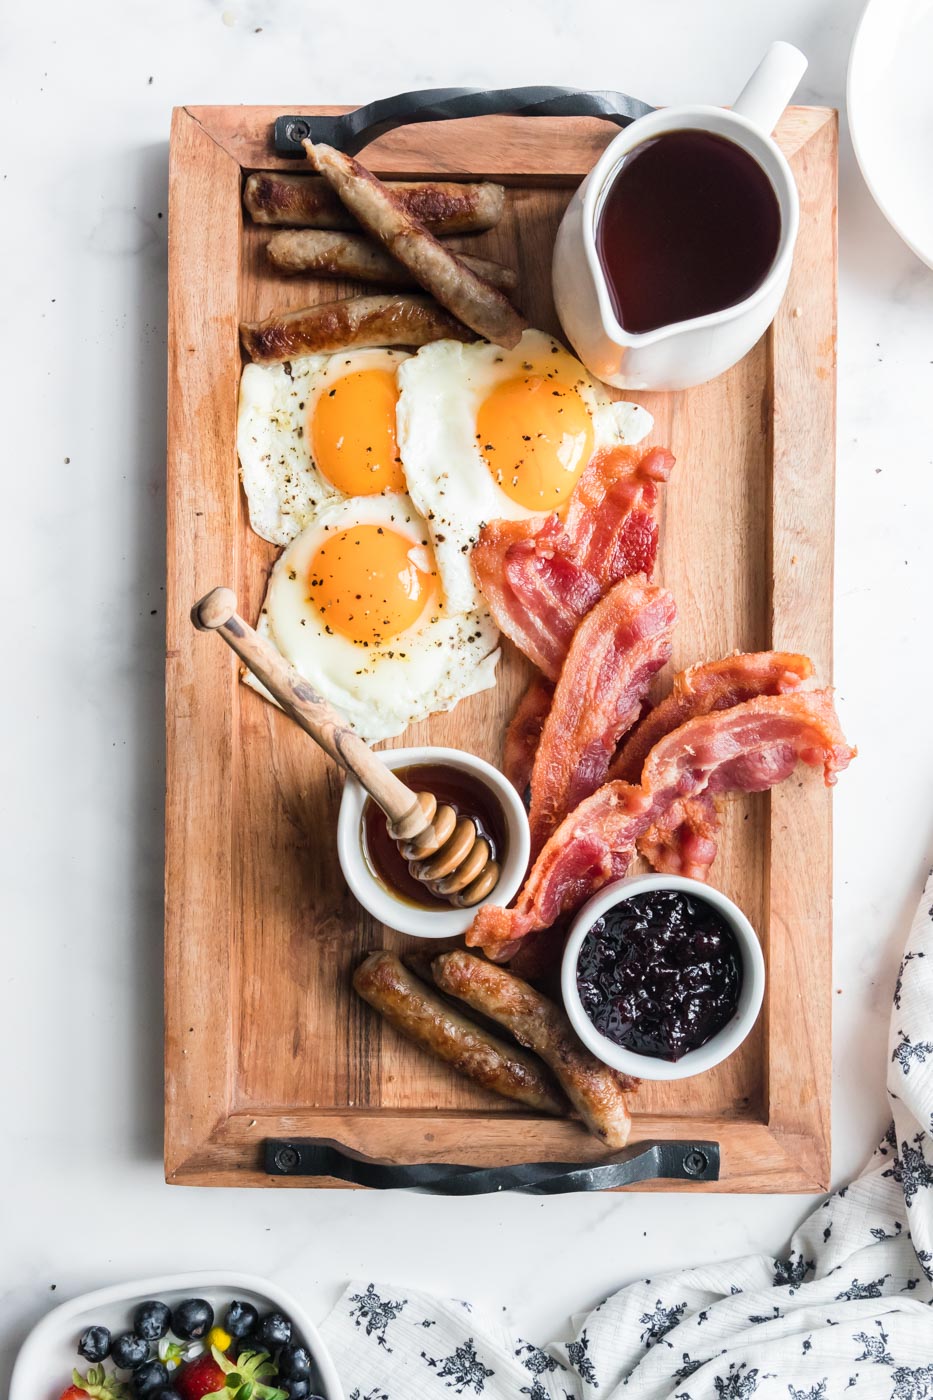 jars of honey maple syrup sunny side up eggs bacon and sausage links arranged on breakfast charcuterie board